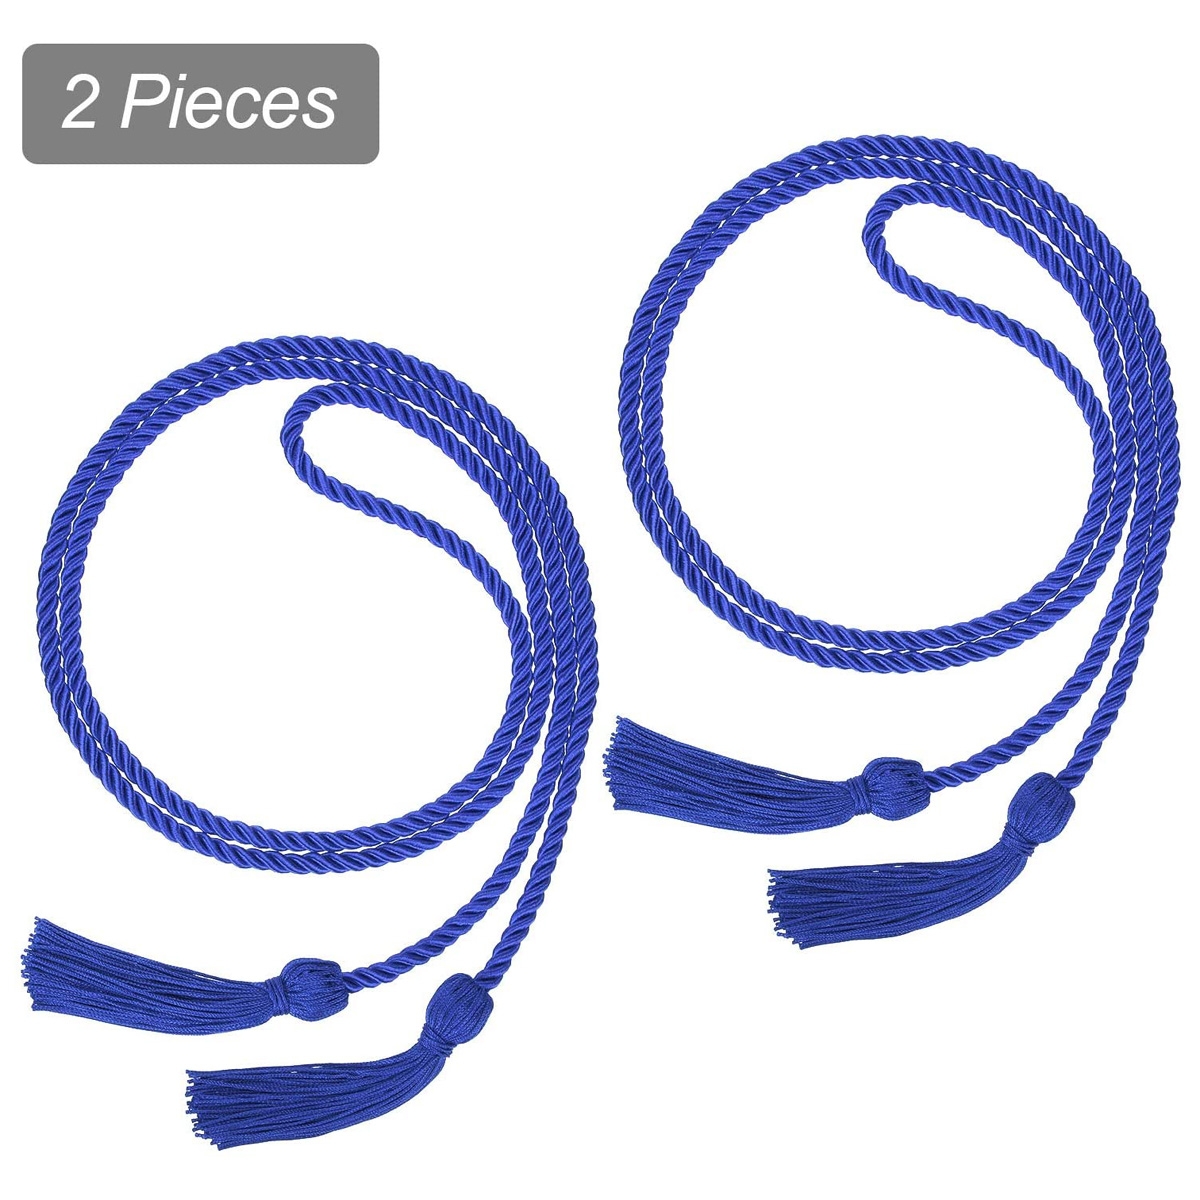 2 Pieces Graduation Cords Polyester Yarn Honor Cord with Tassel for Graduation Students (Blue)